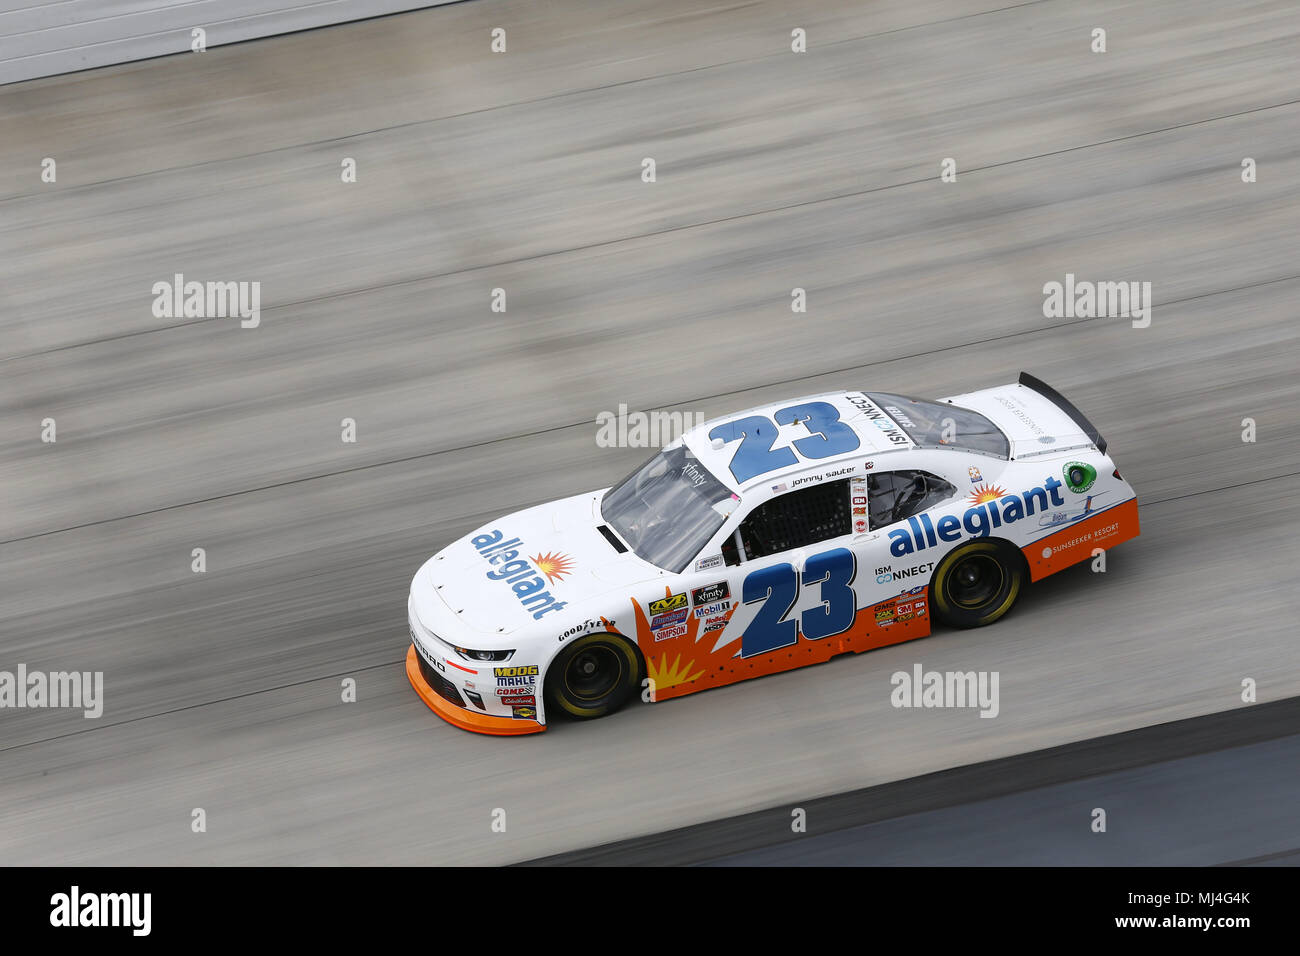 Dover, Delaware, USA. 4th May, 2018. Johnny Sauter (23) takes to the track for first practice for the OneMain Financial 200 at Dover International Speedway in Dover, Delaware. Credit: Justin R. Noe Asp Inc/ASP/ZUMA Wire/Alamy Live News Stock Photo